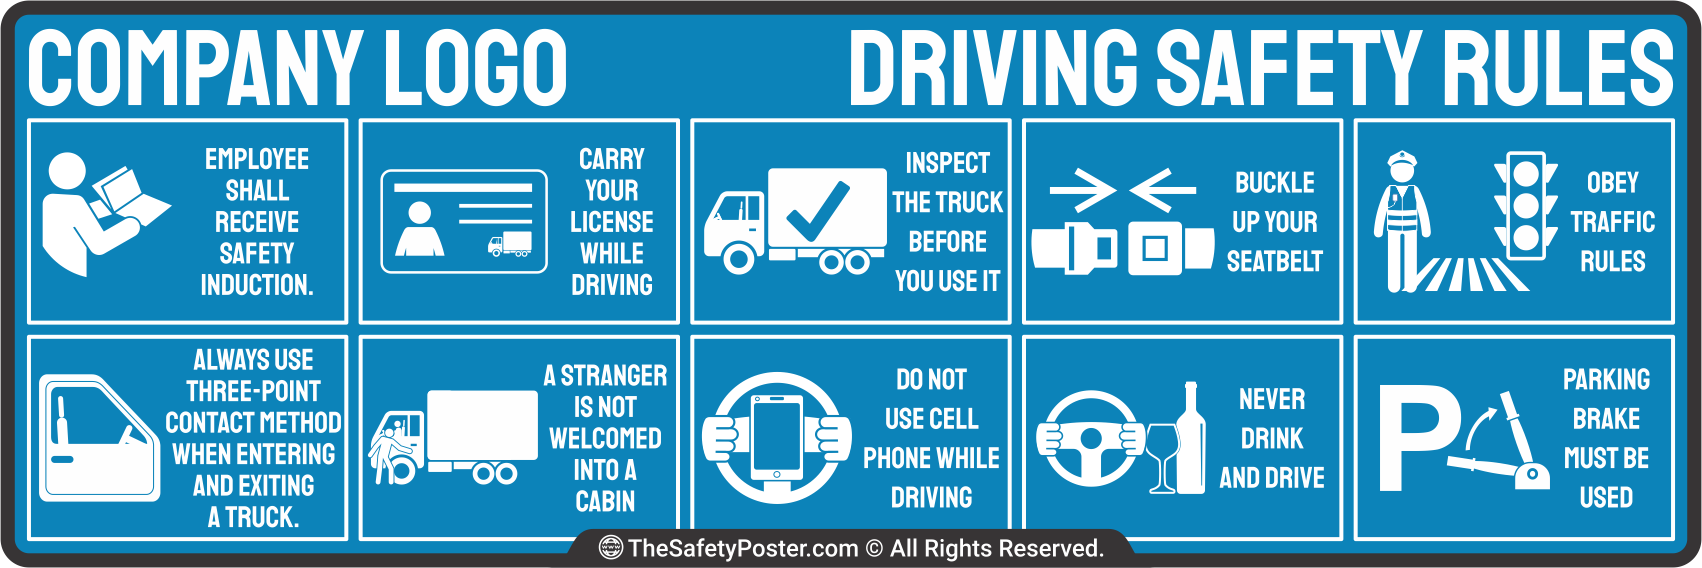 Driving safety rules